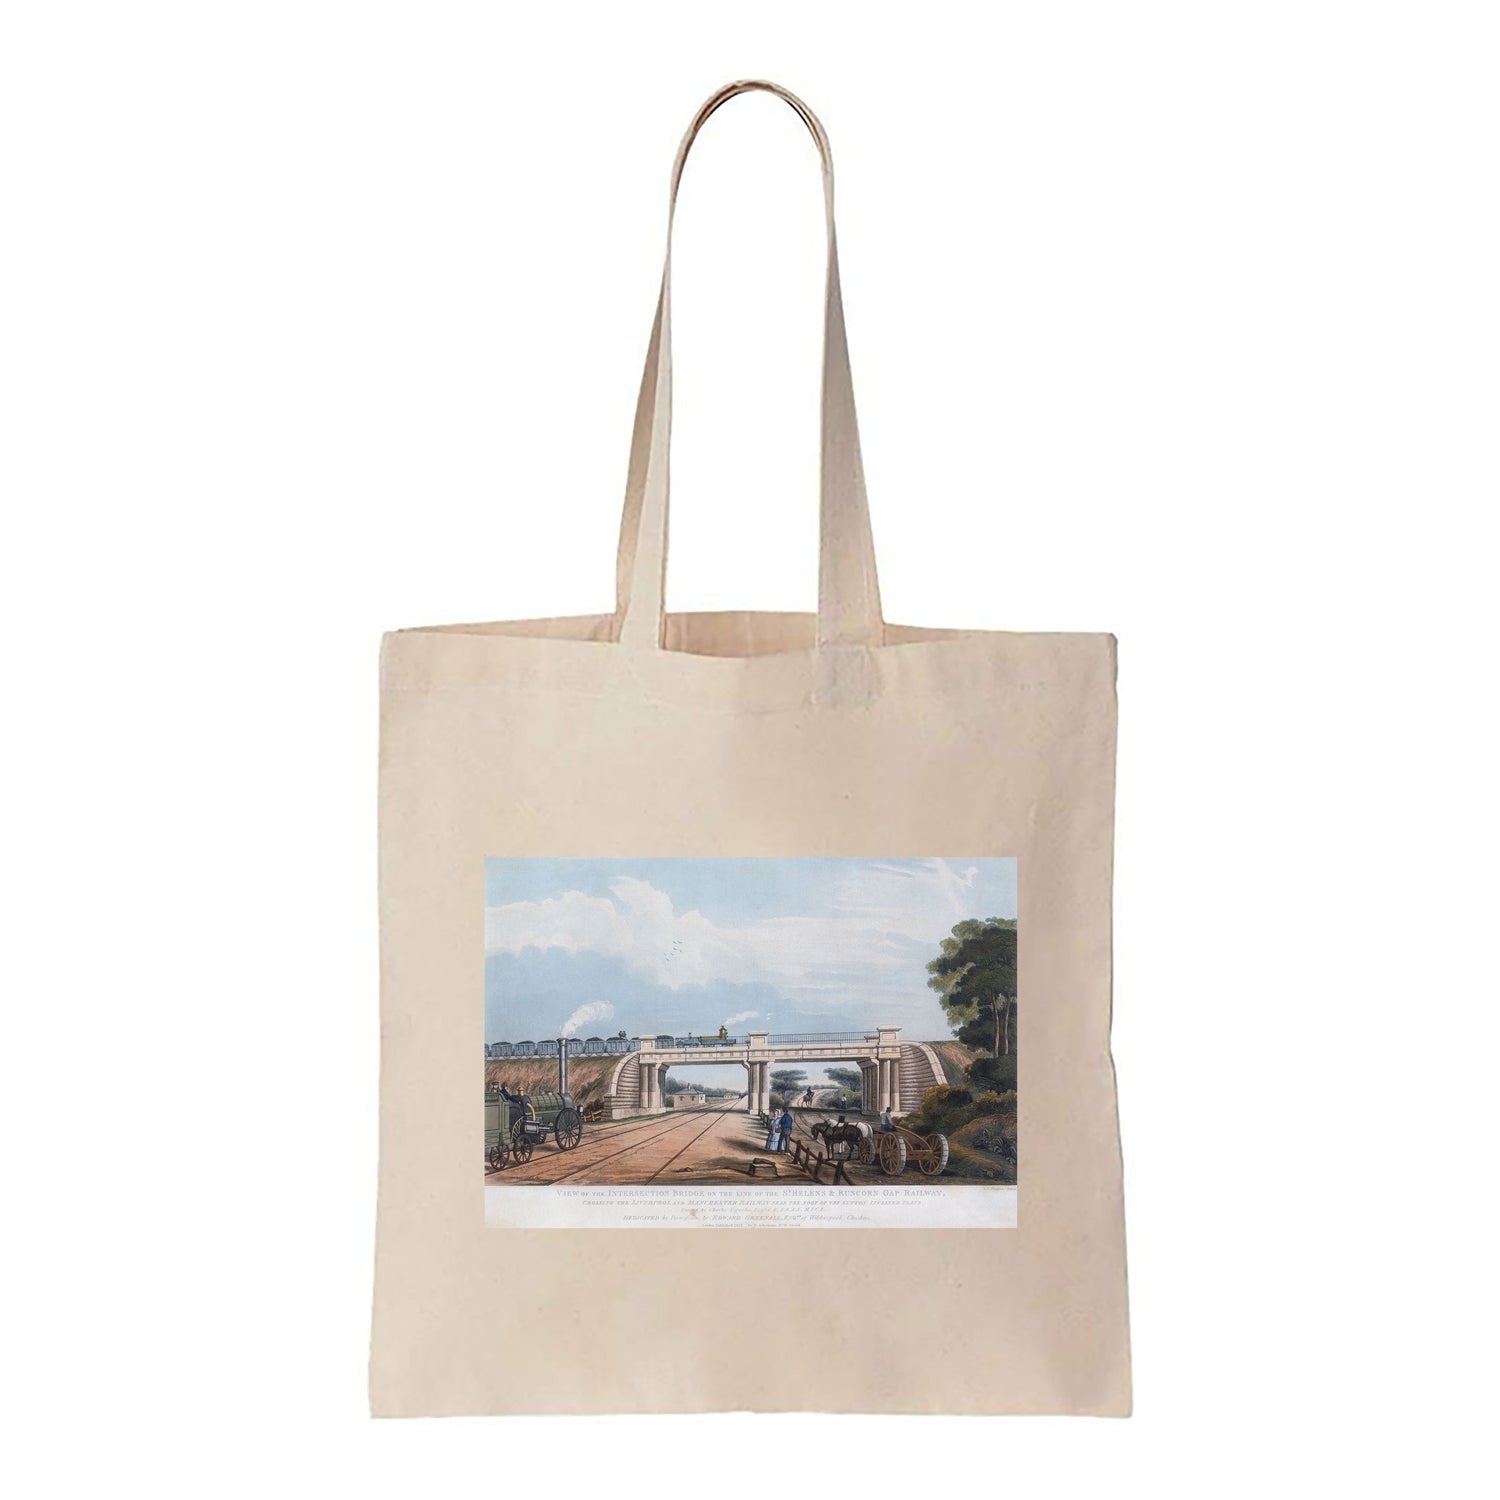 View of the Intersection Bridge, St Helens - Canvas Tote Bag